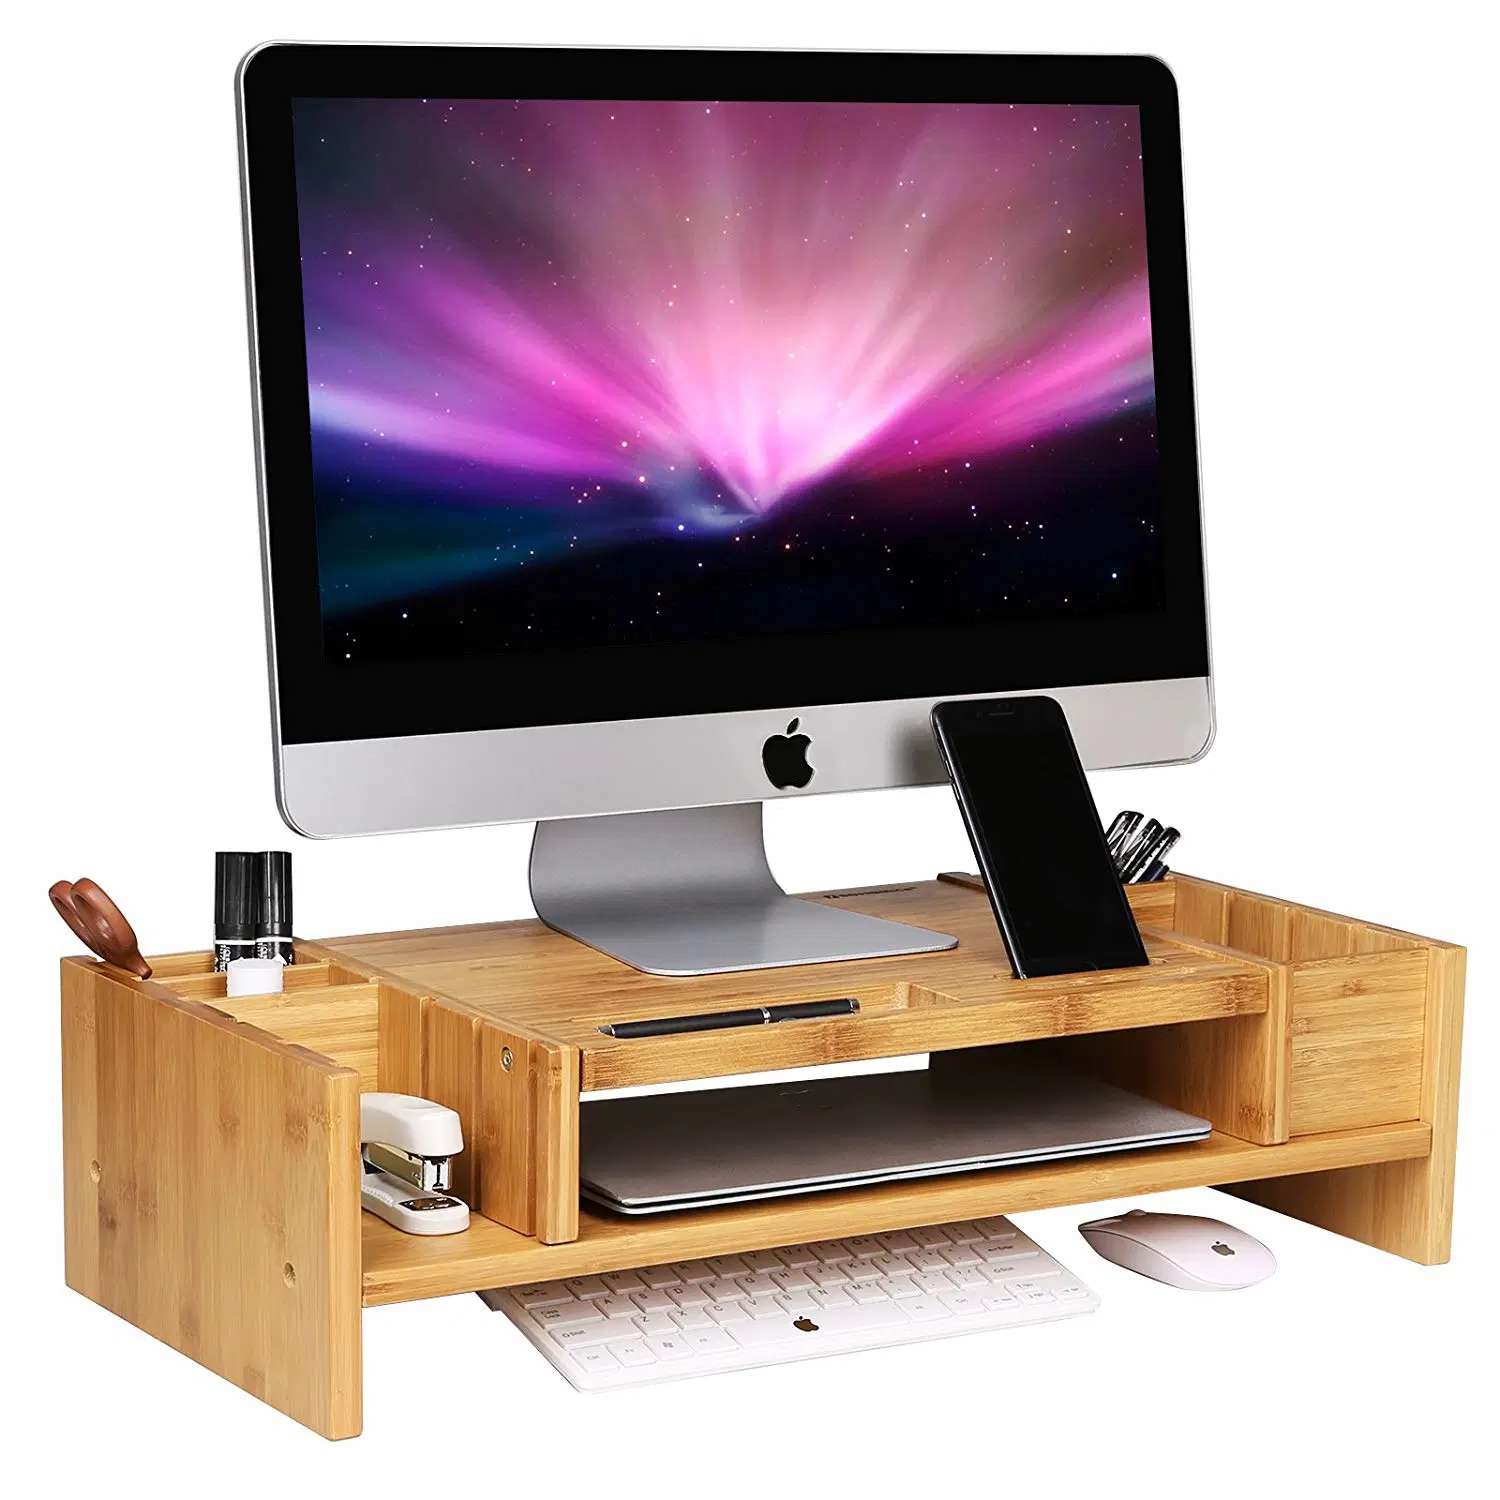 Monitor Stand Riser with Drawers, Sturdy Desk Organizer Laptop Stand with Keyboard Storage, Office Computer